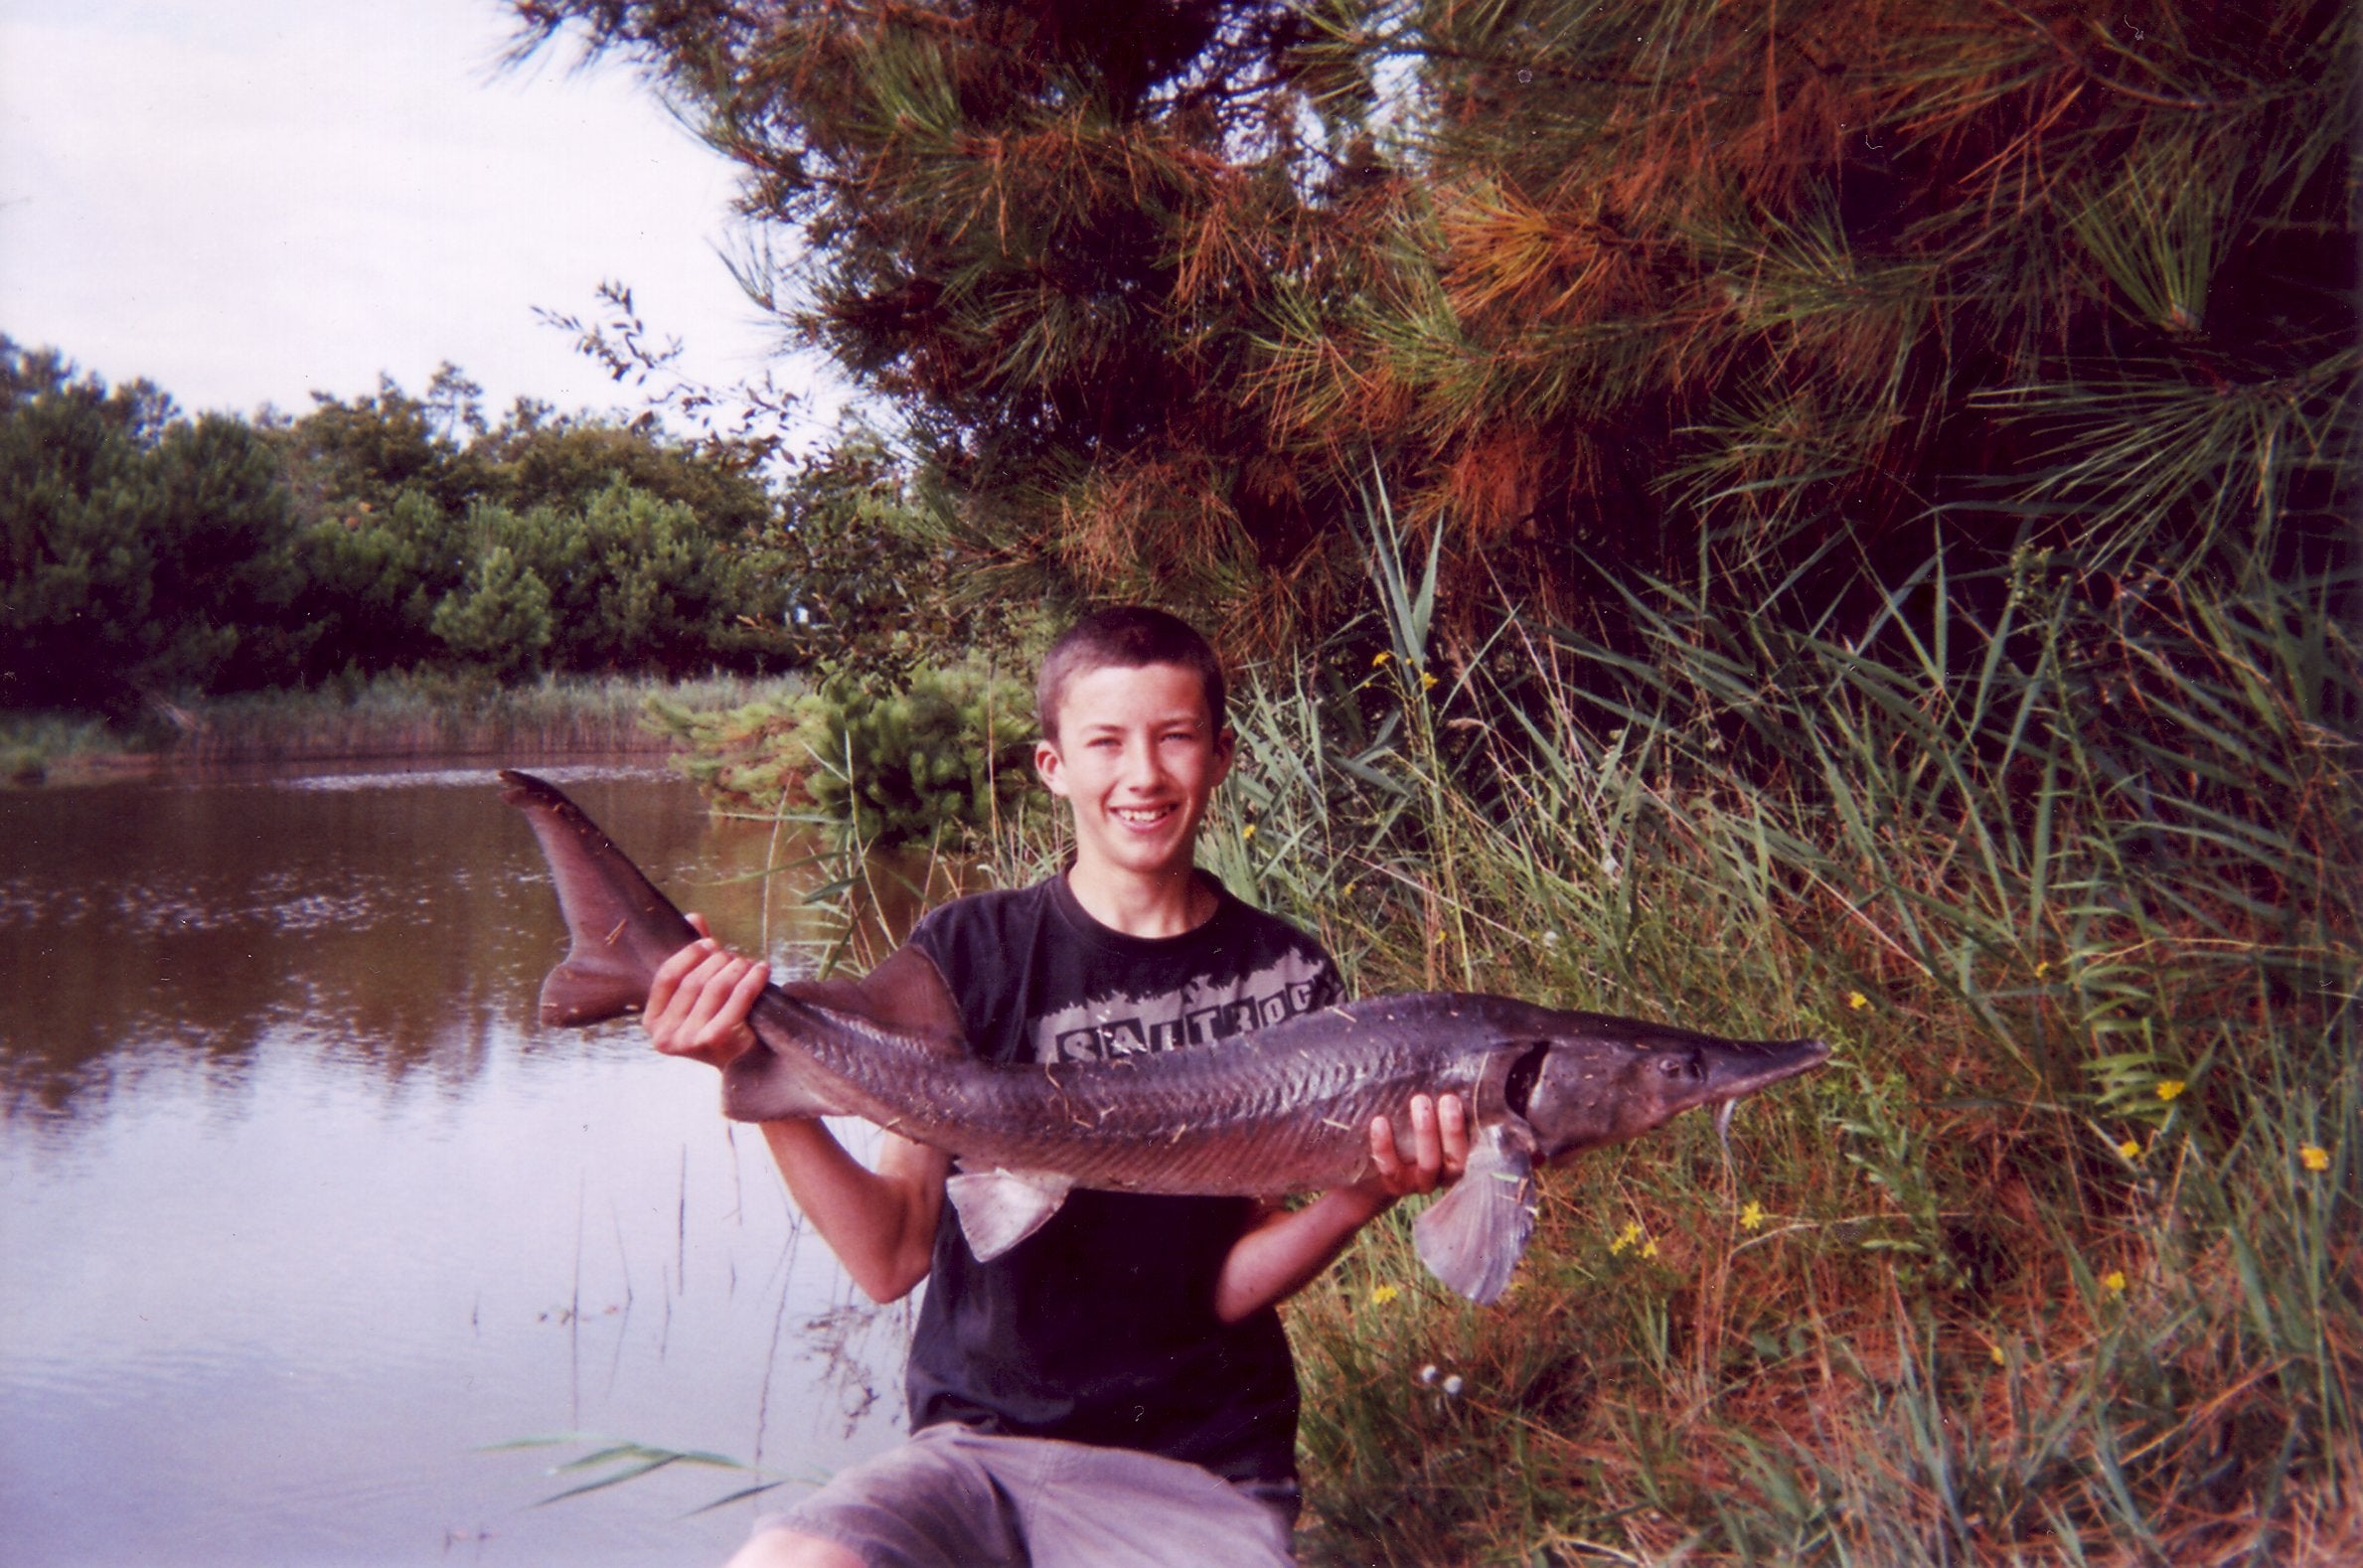 Liam with a Sturgeon caught in France